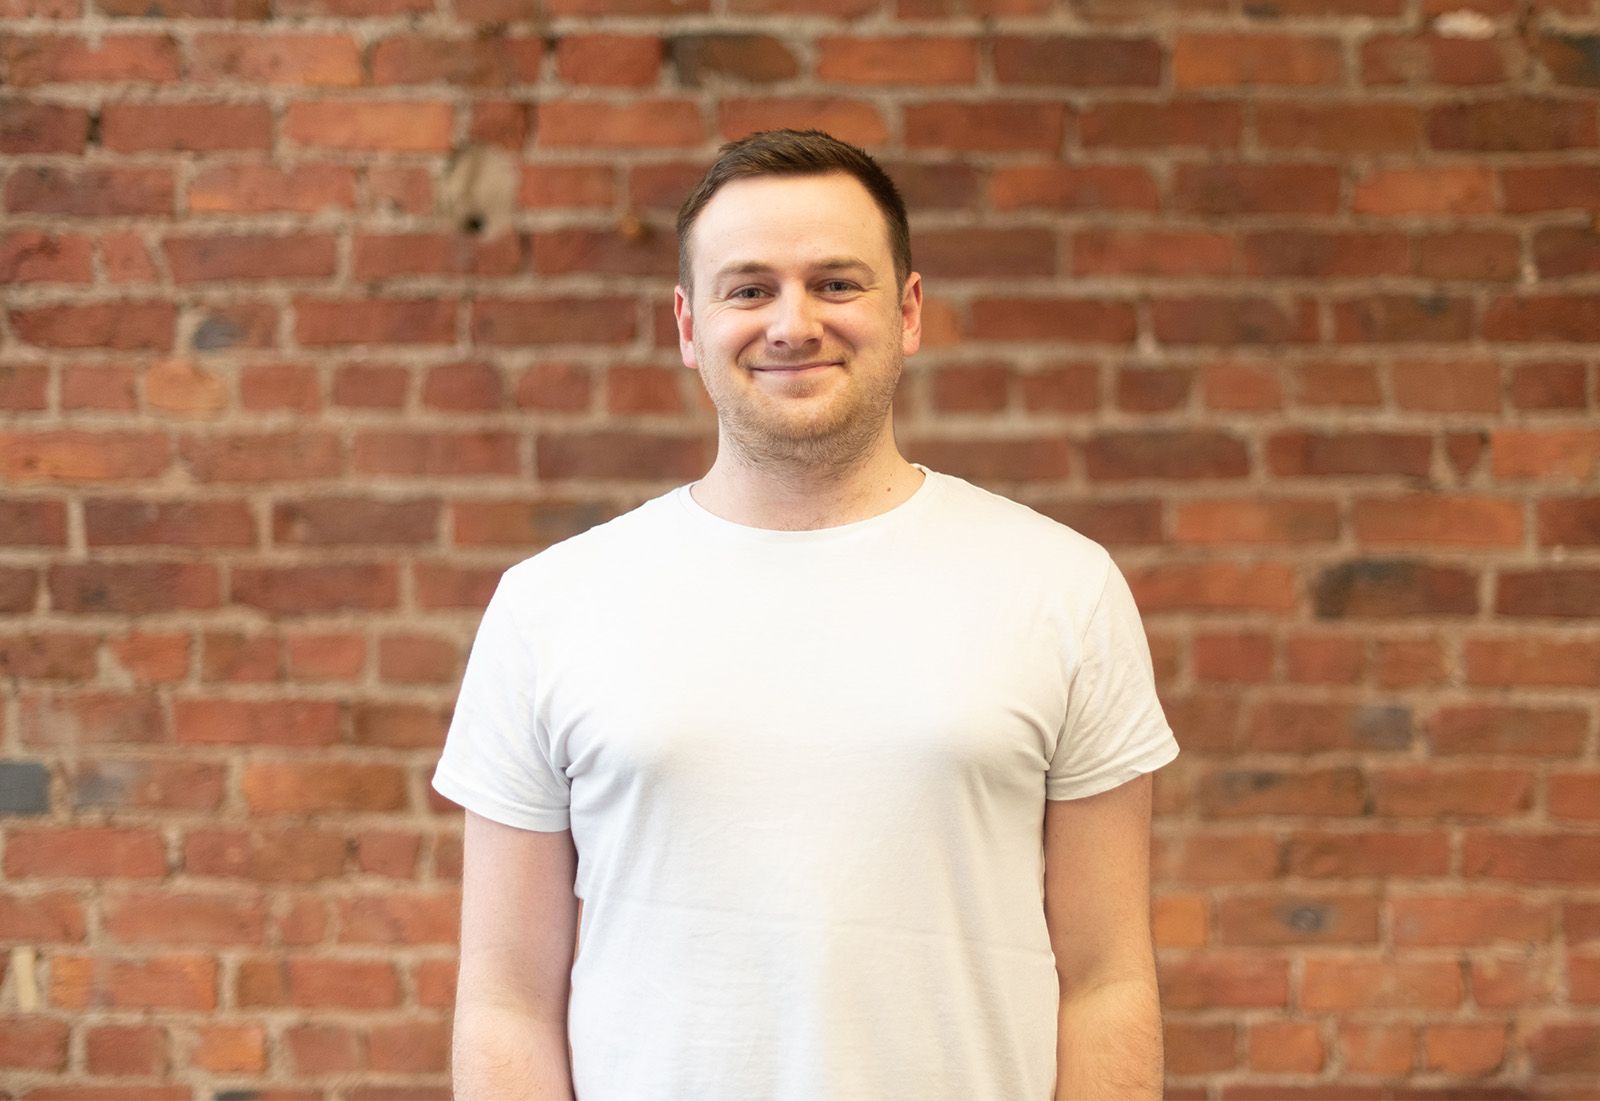 Great with a wedge of cheddar — Meet Jacob, our new front-end developer